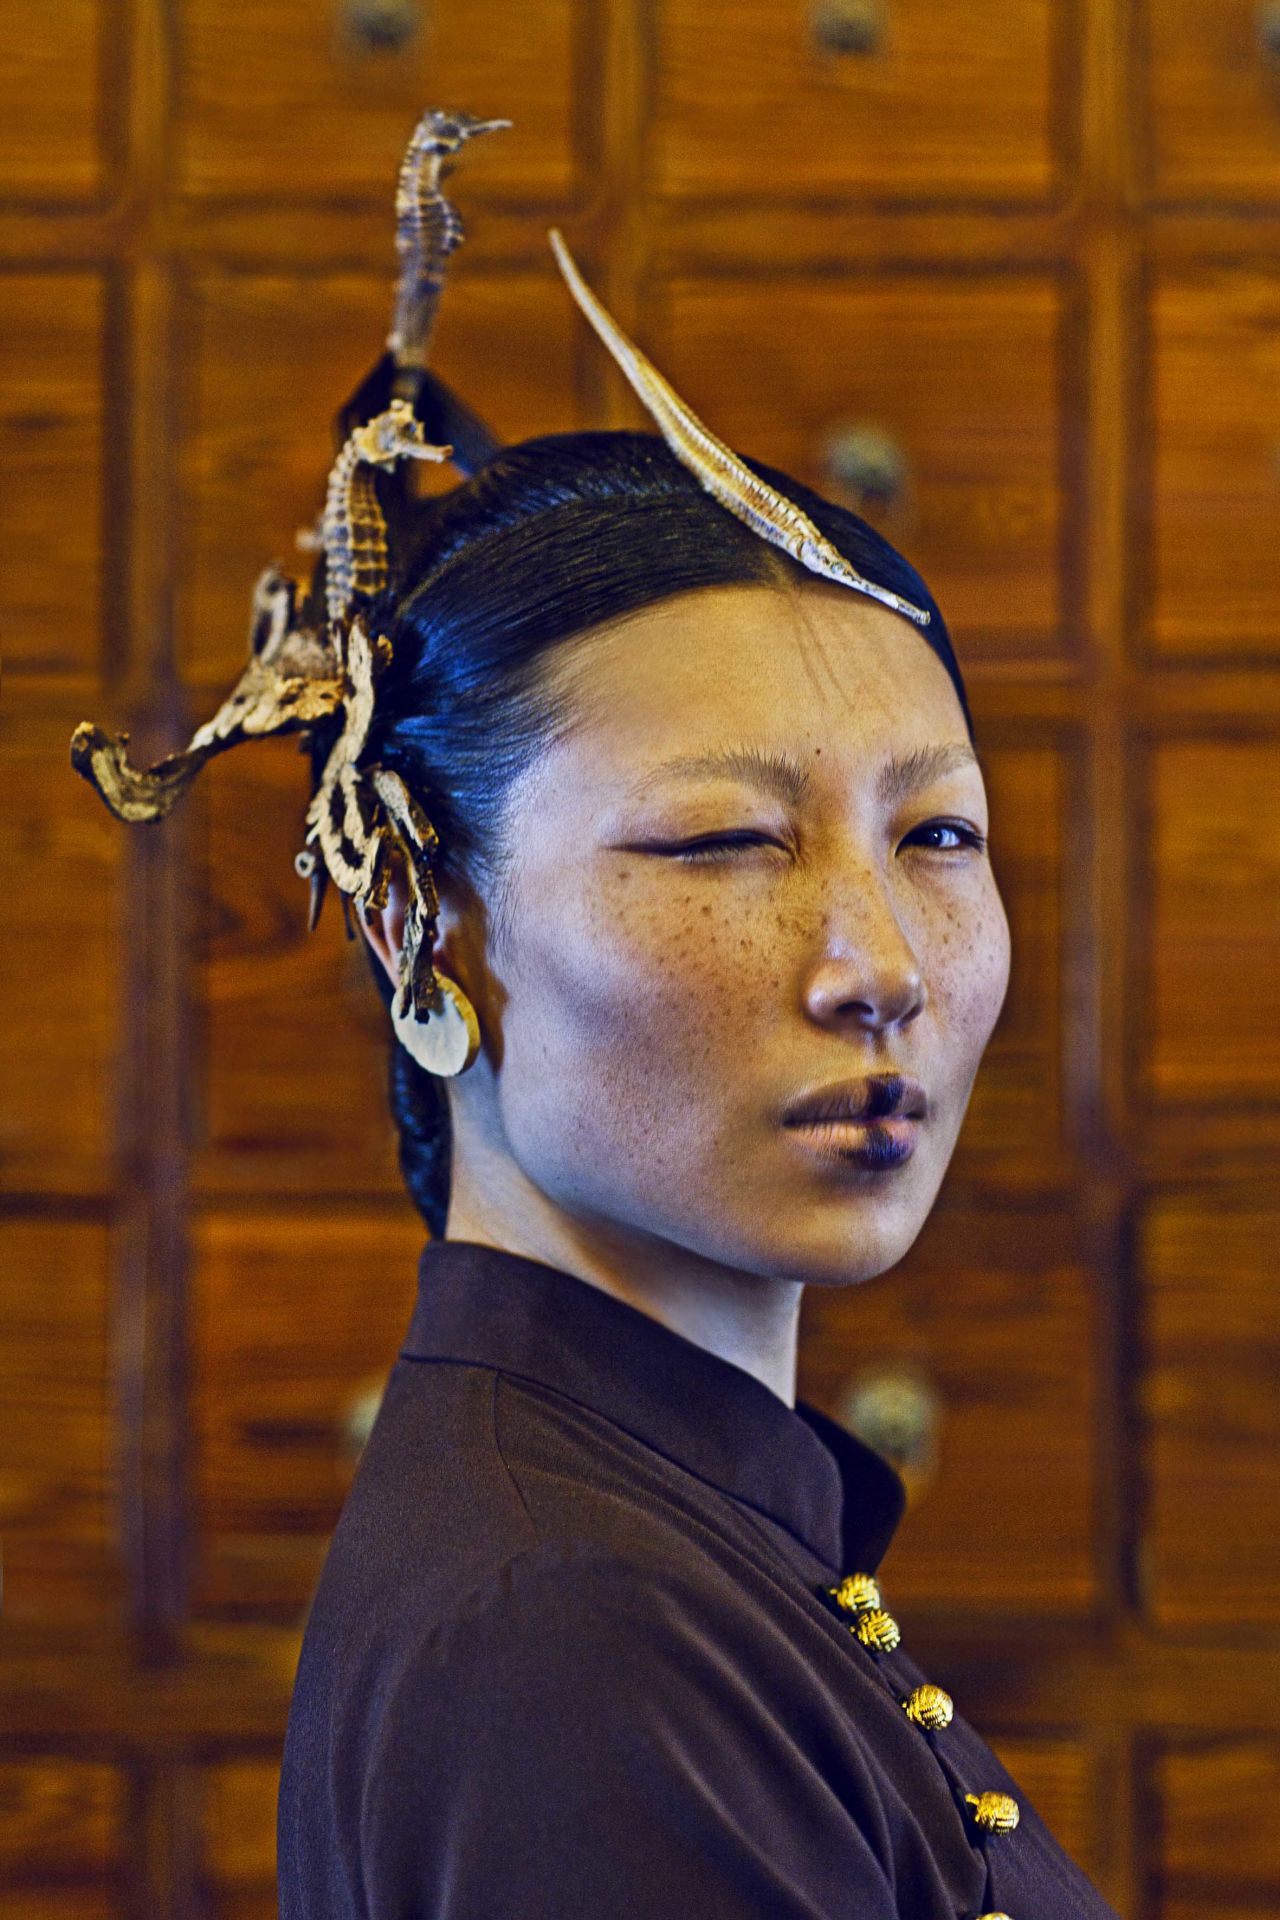 This portrait, entitled "Chinese Medicine" was shot in 2012 for i.D. The series depicted China's ethnic minorities.